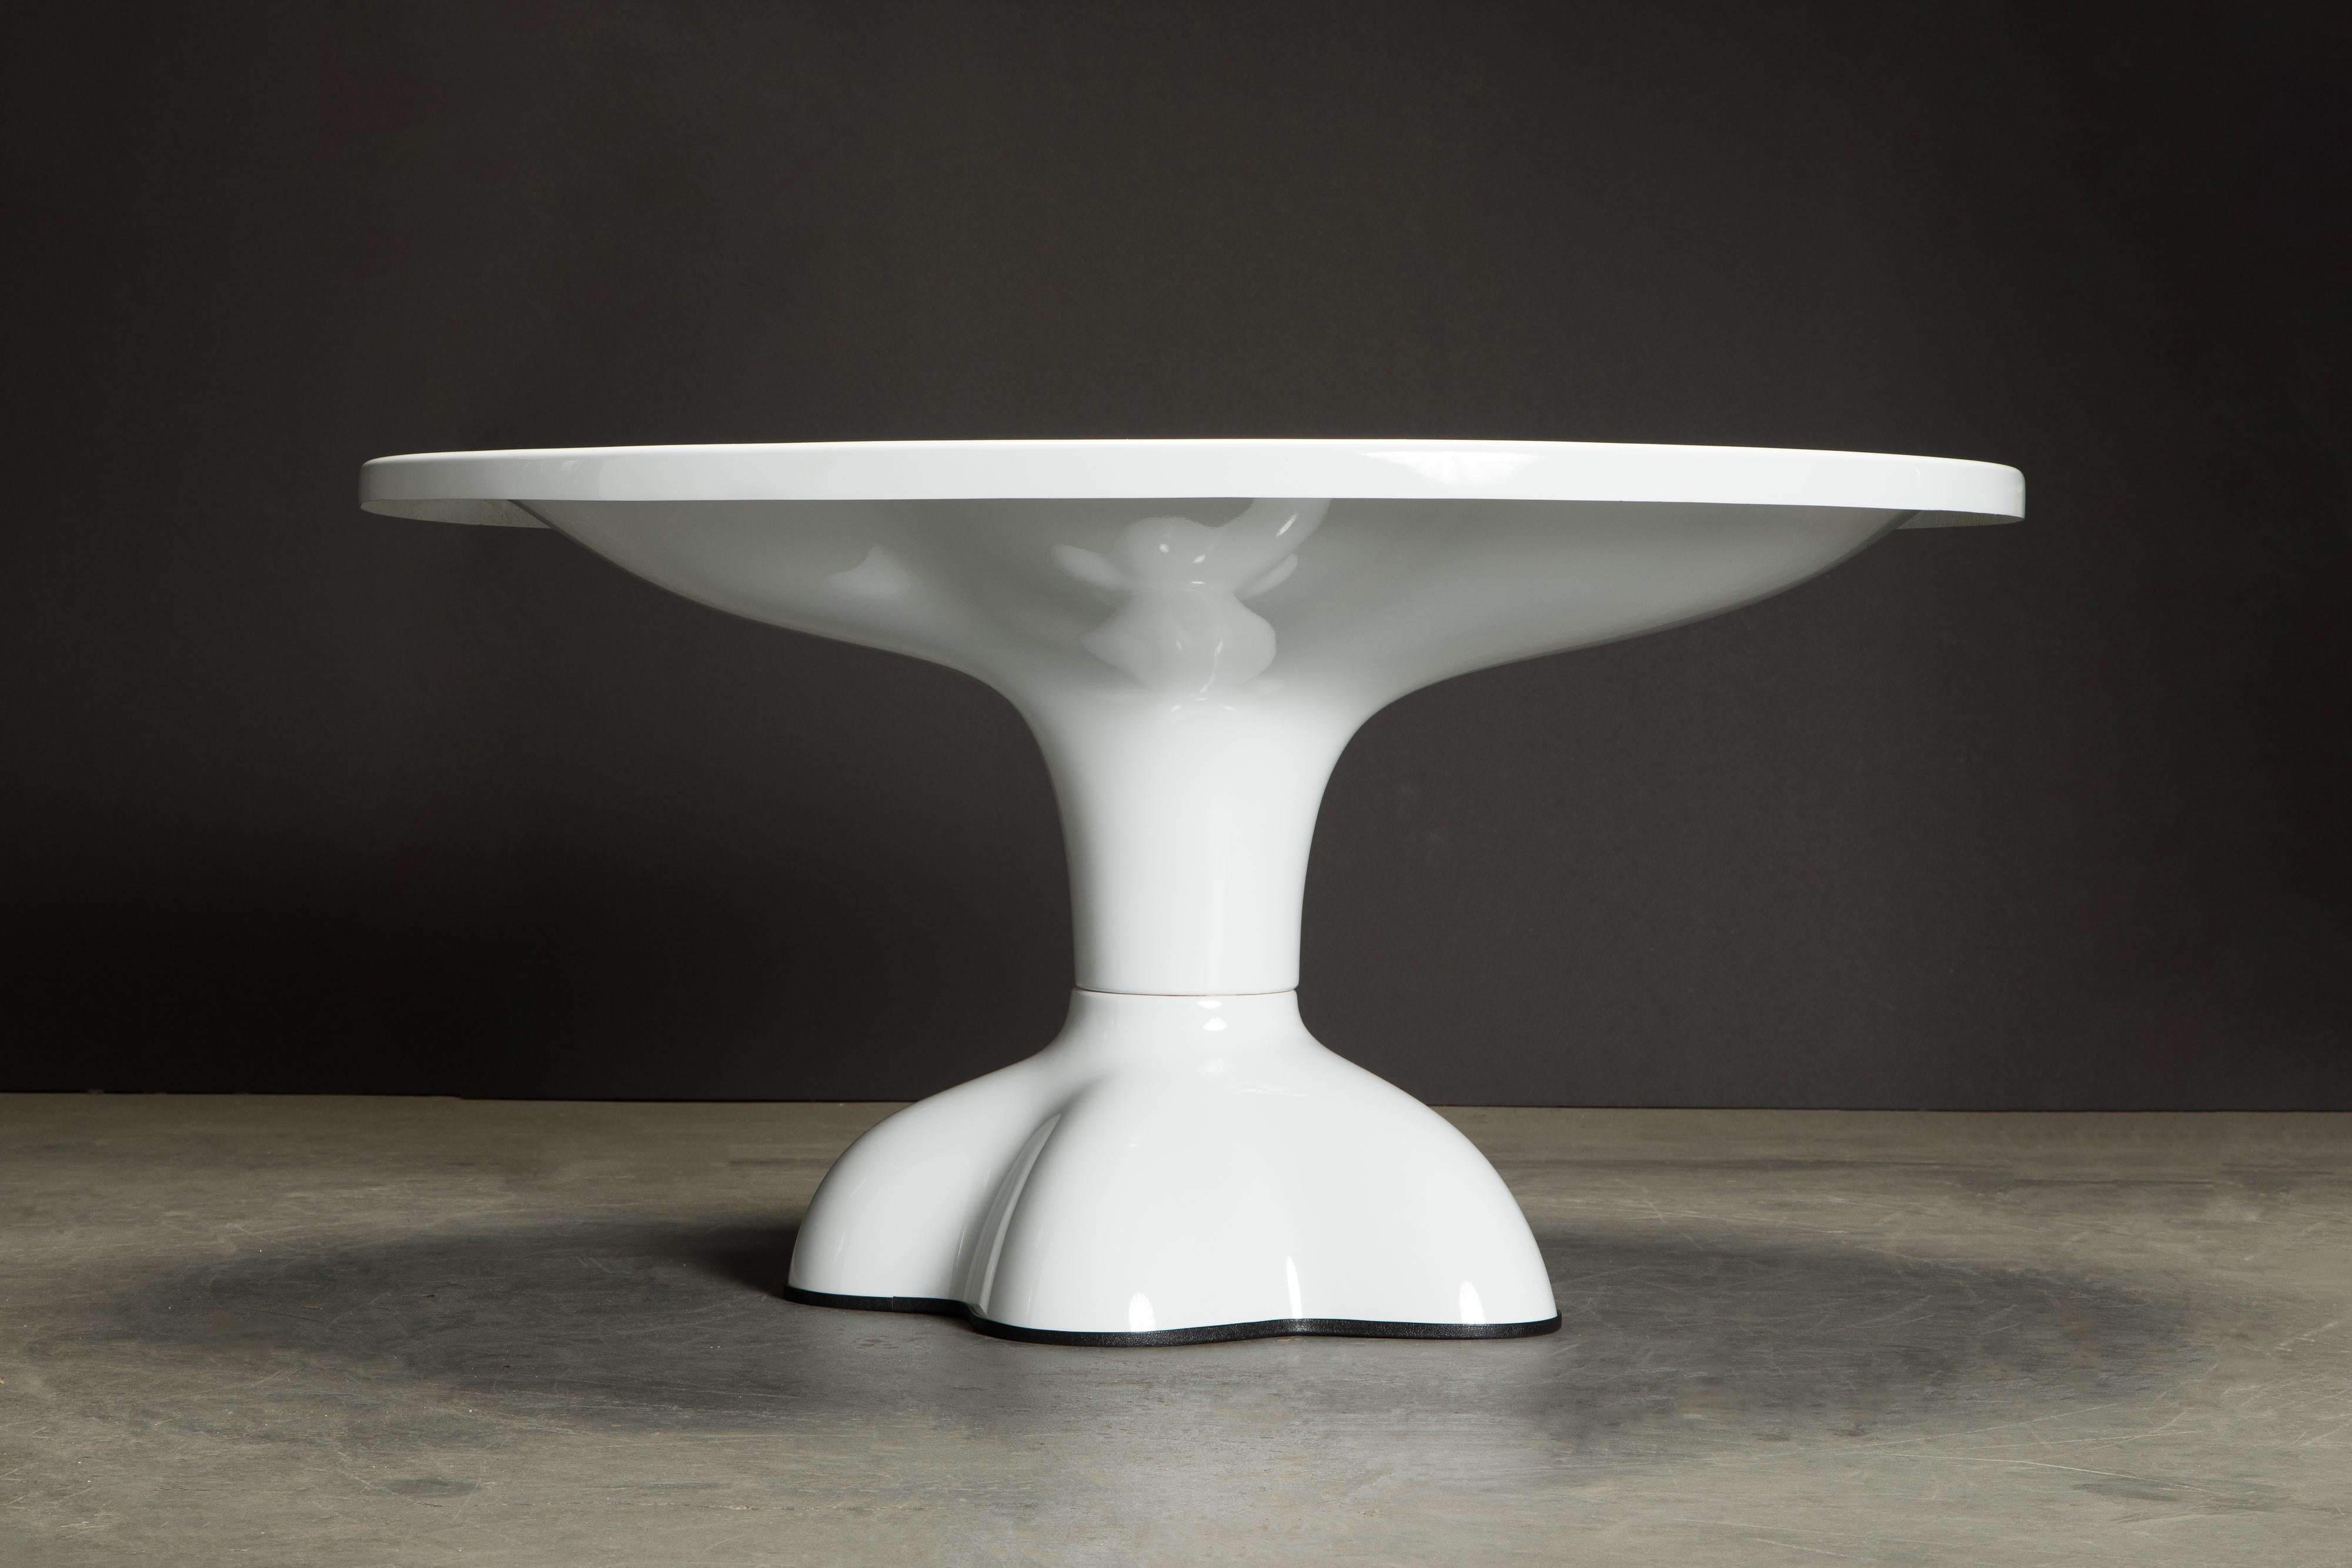 This rare early production collectors piece is a circa 1969 'Molar' dining table by Wendell Castle (American, 1932-2018) made from gel-coated white fiberglass with black rubber footing. The top is a fantastic oval shape (56